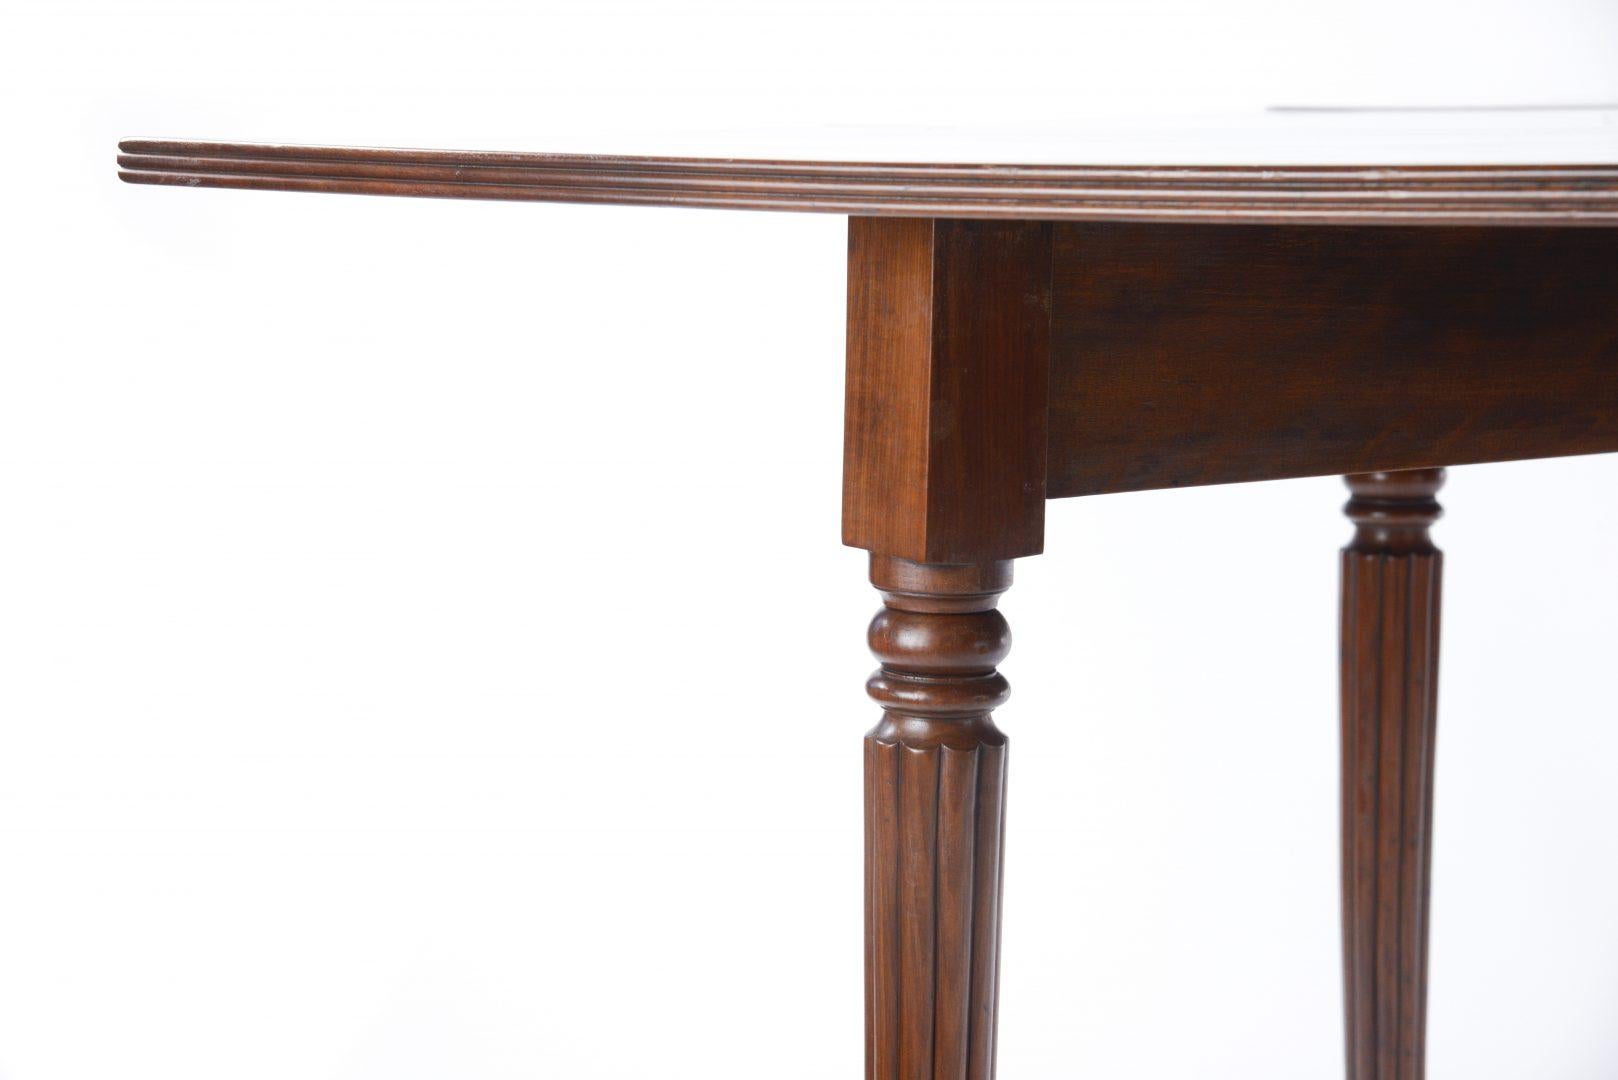 British Regency Mahogany Drop Leaf Dining Table in the Style of Gillows